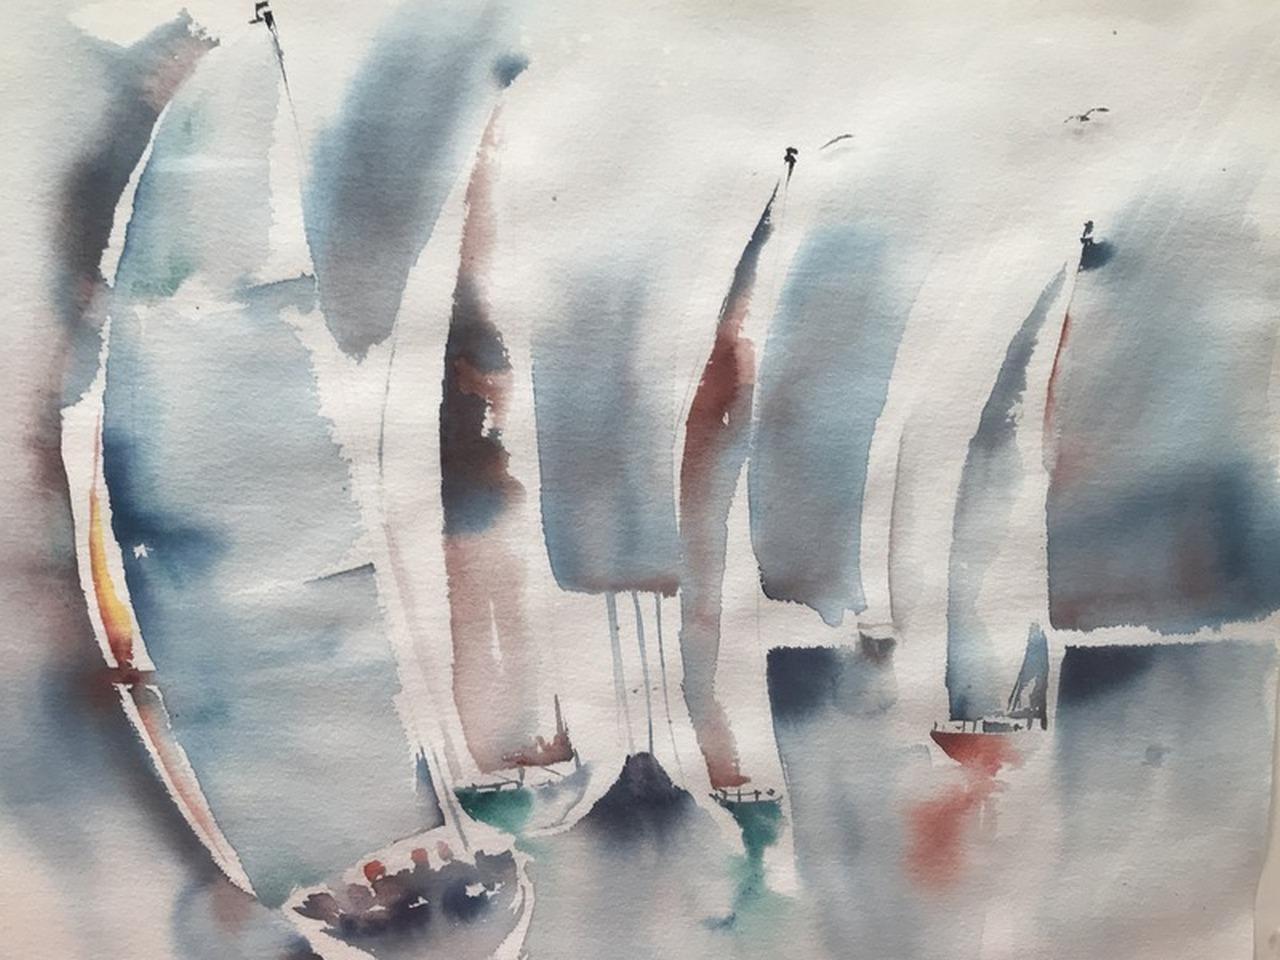 Watercolor painting of four sailboats by Shelly Shepherd. Signed and dated 1986.
Shelly Bechter Shepherd was a nationally recognized watercolorist and a teacher with her studio at the Hand Workshop Art Center in Richmond, Virginia. She also taught